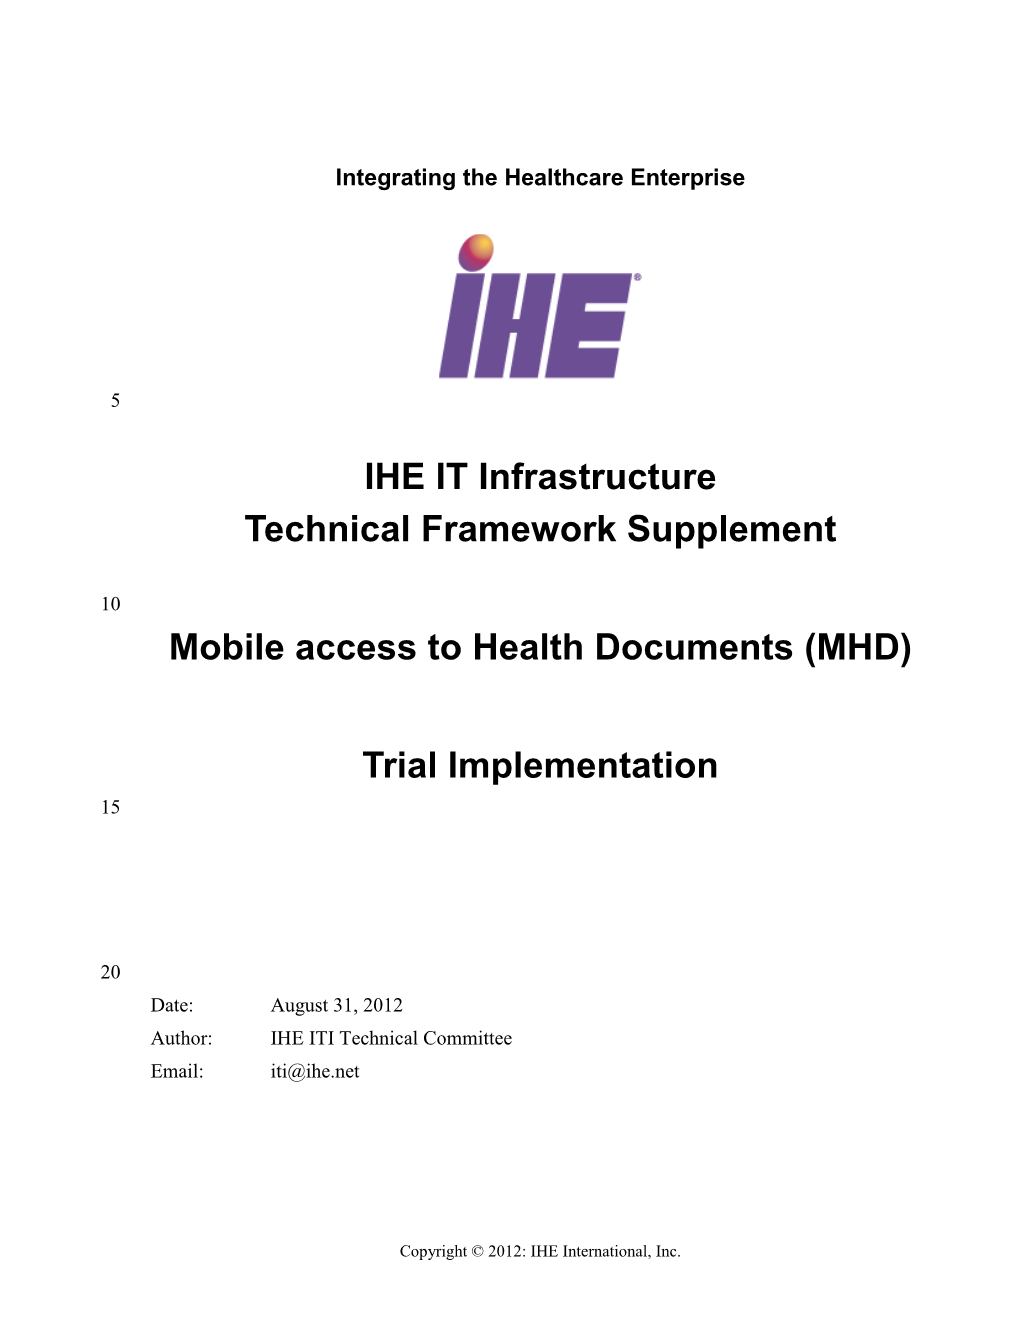 IHE IT Infrastructure Technical Framework Supplement Mobile